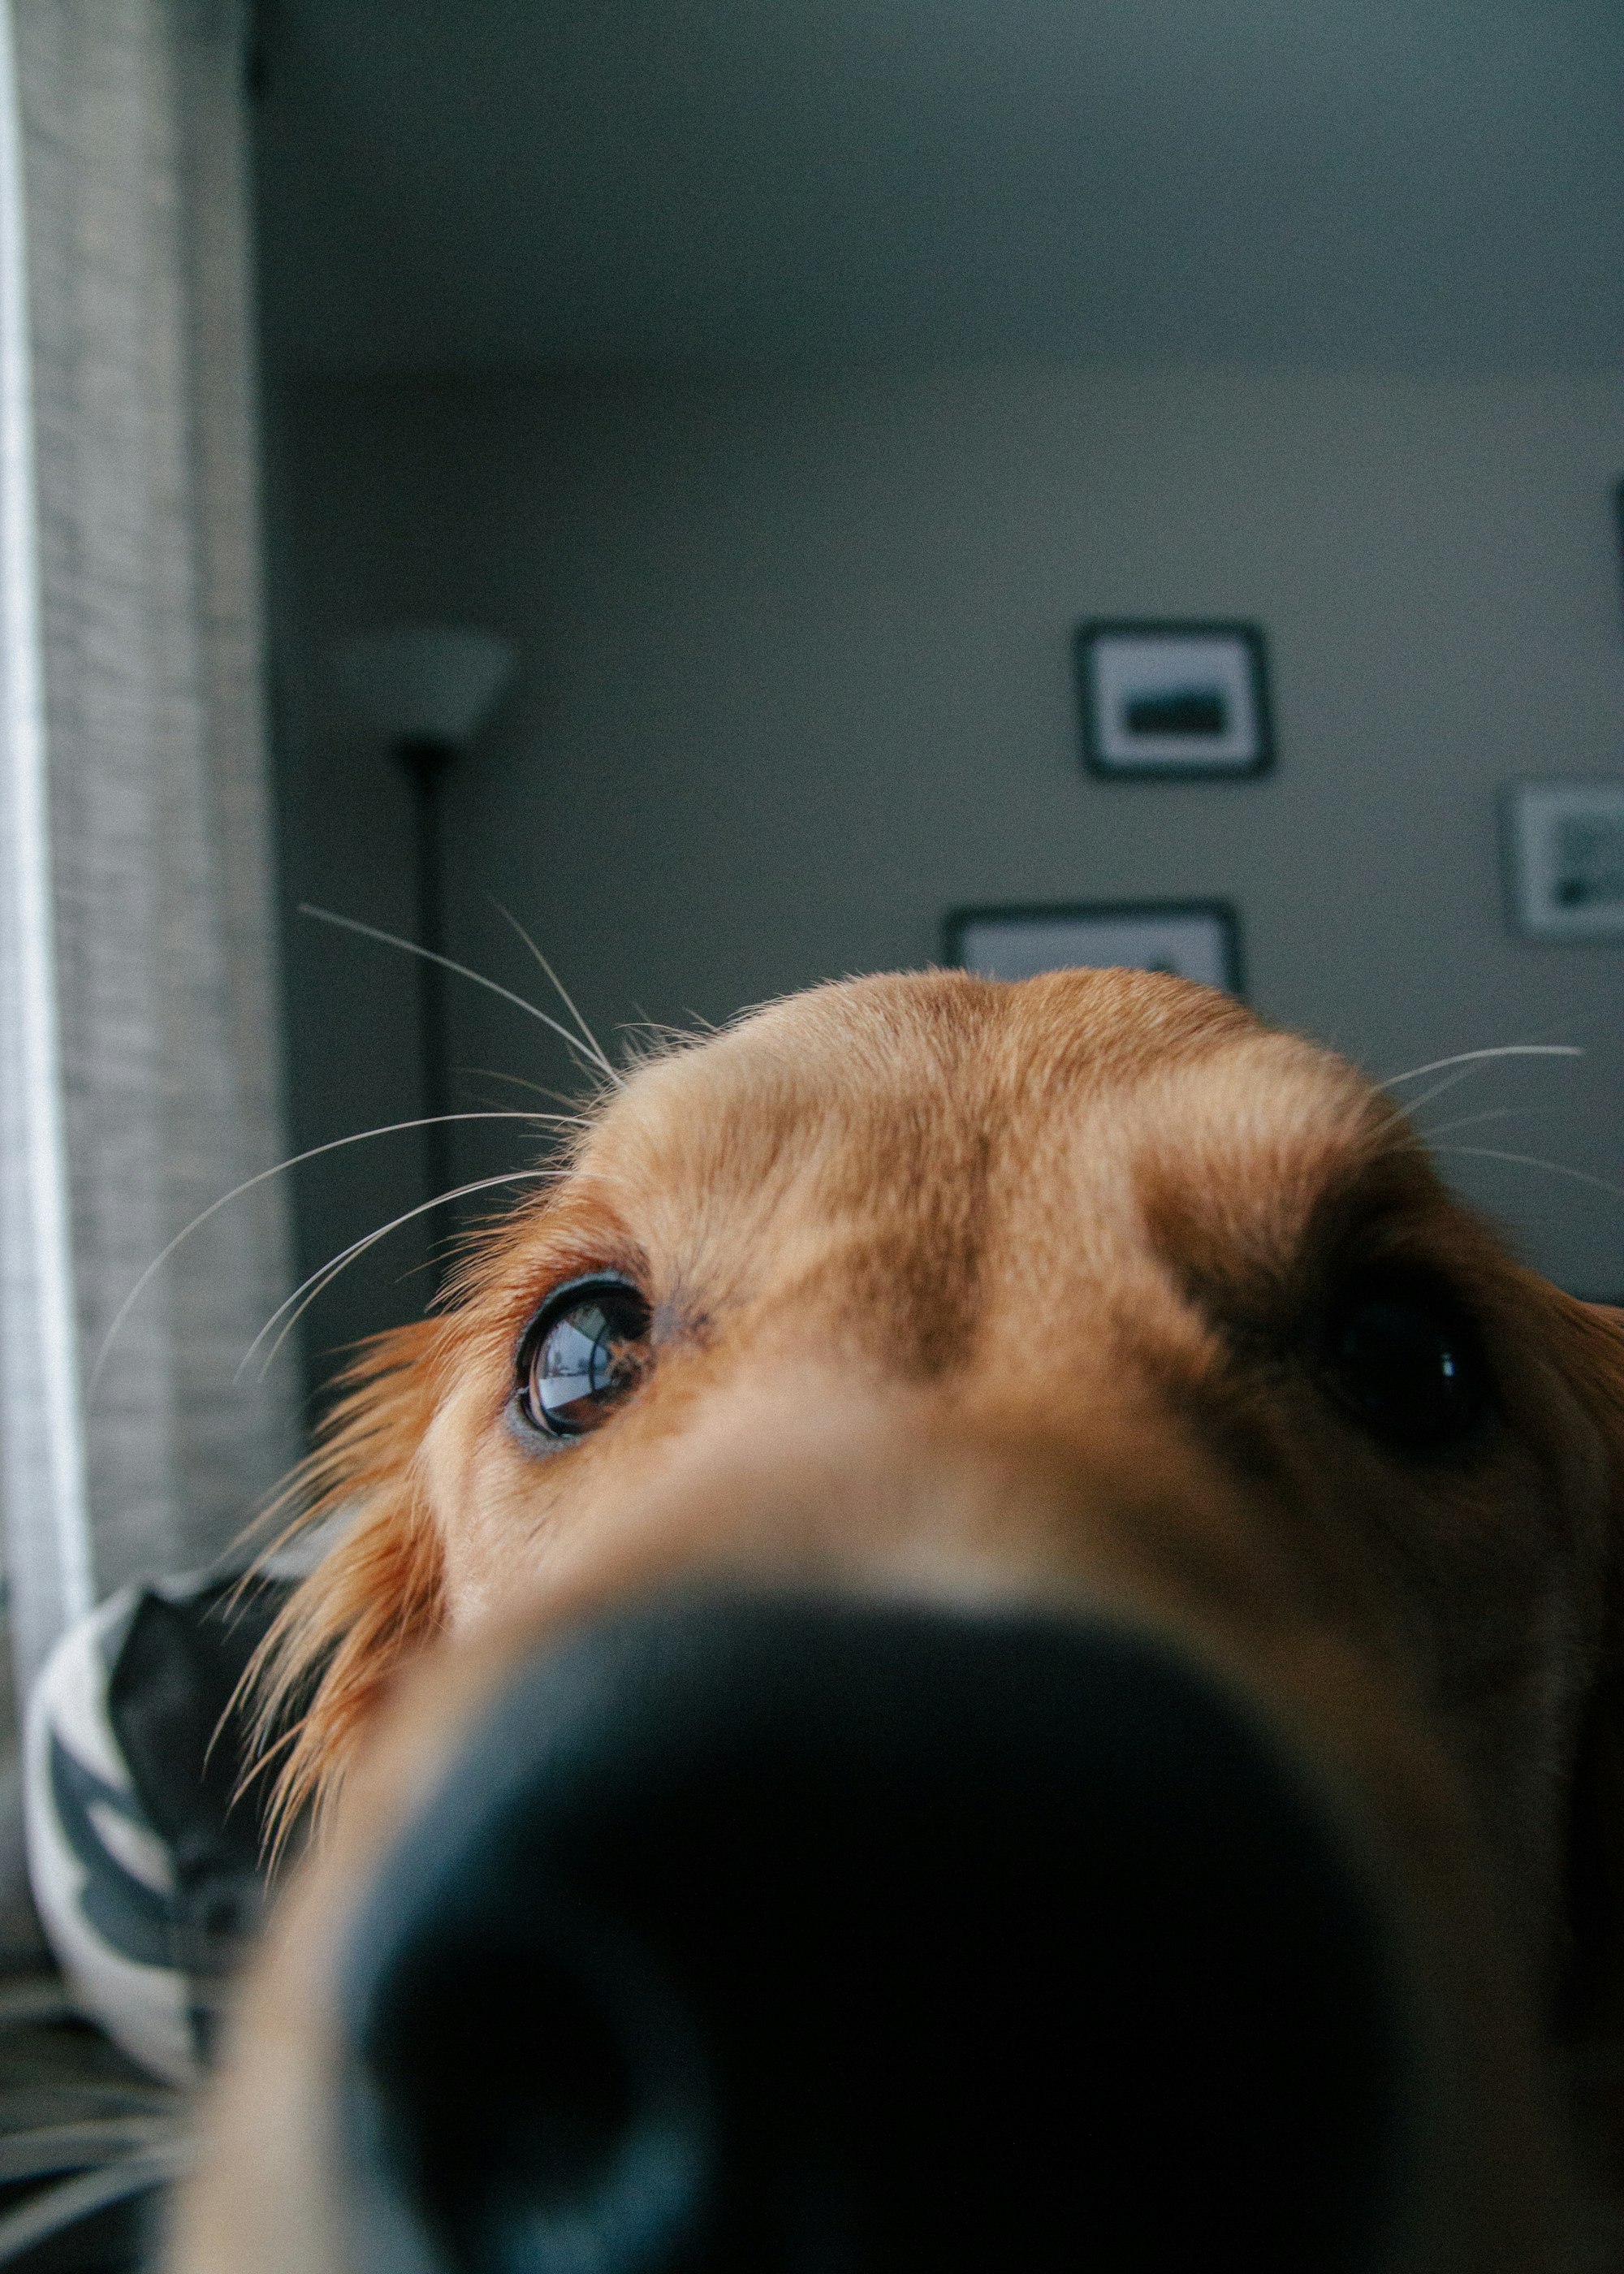 Puppy nose. Going in to lick the camera.